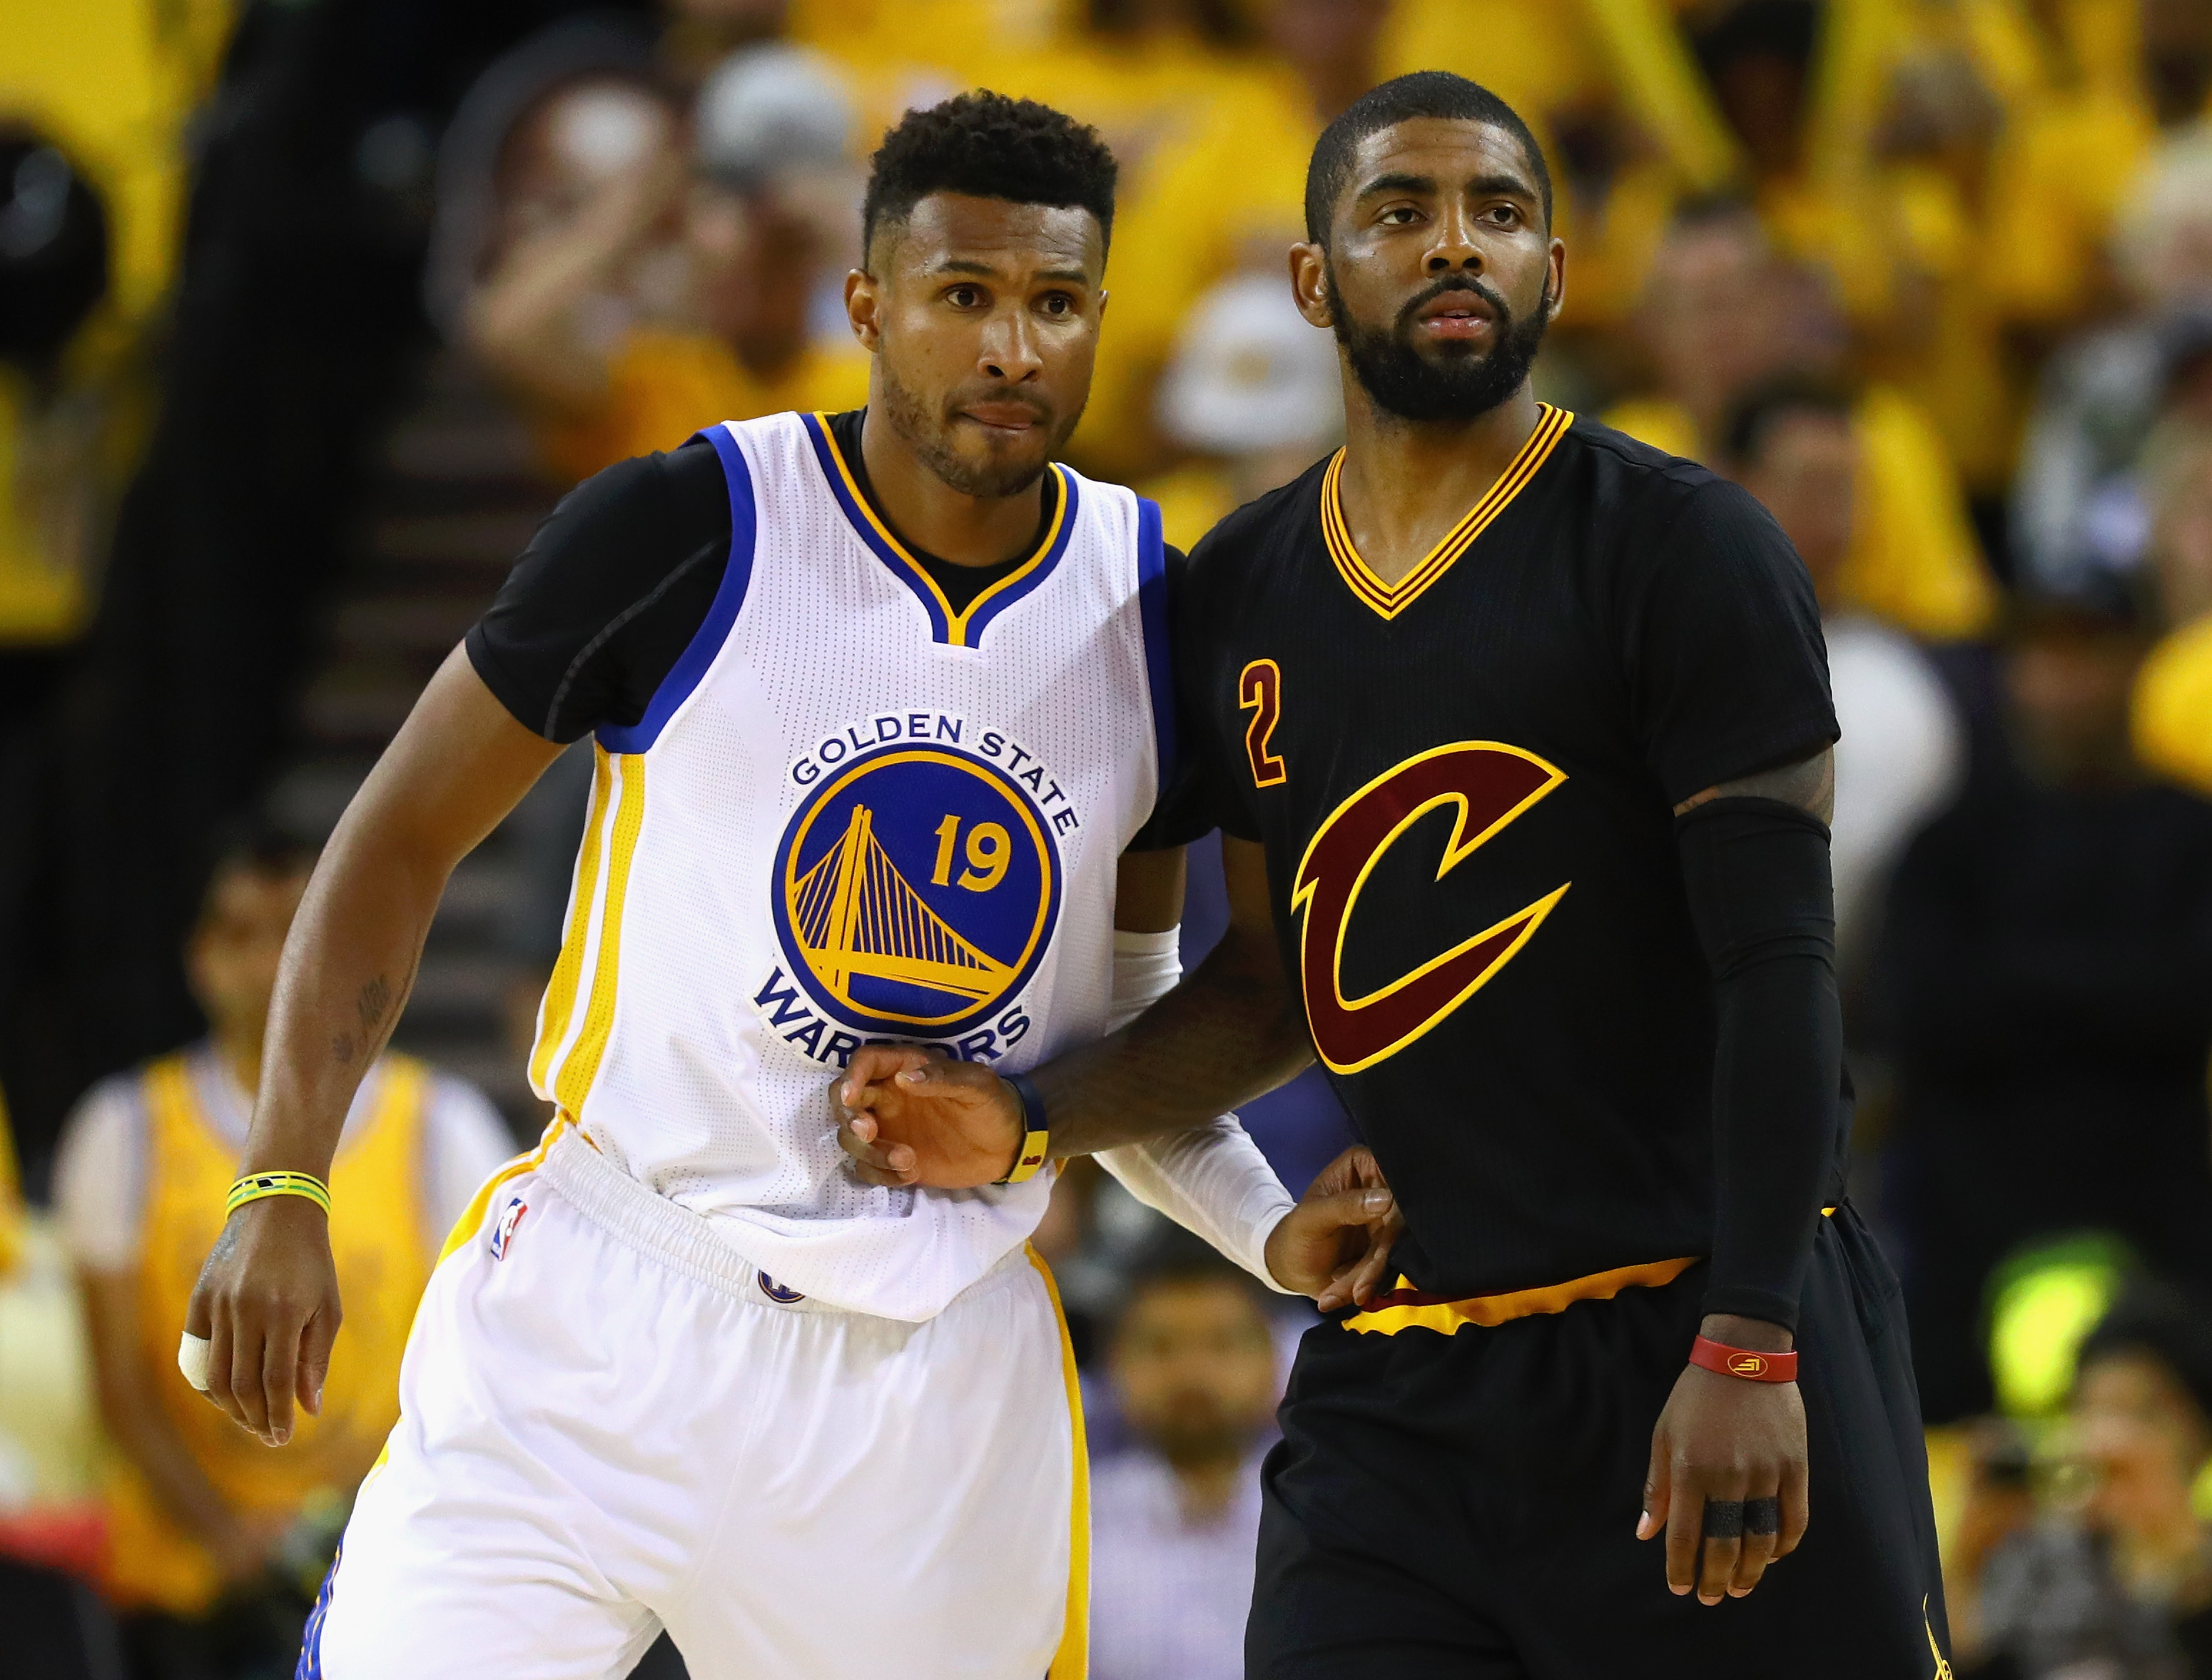 OAKLAND, CA - JUNE 13: Leandro Barbosa #19 of the Golden State Warriors and Kyrie Irving #2 of the Cleveland Cavaliers look on during the second half in Game 5 of the 2016 NBA Finals at ORACLE Arena on June 13, 2016 in Oakland, California. NOTE TO USER: User expressly acknowledges and agrees that, by downloading and or using this photograph, User is consenting to the terms and conditions of the Getty Images License Agreement.   Ezra Shaw/Getty Images/AFP